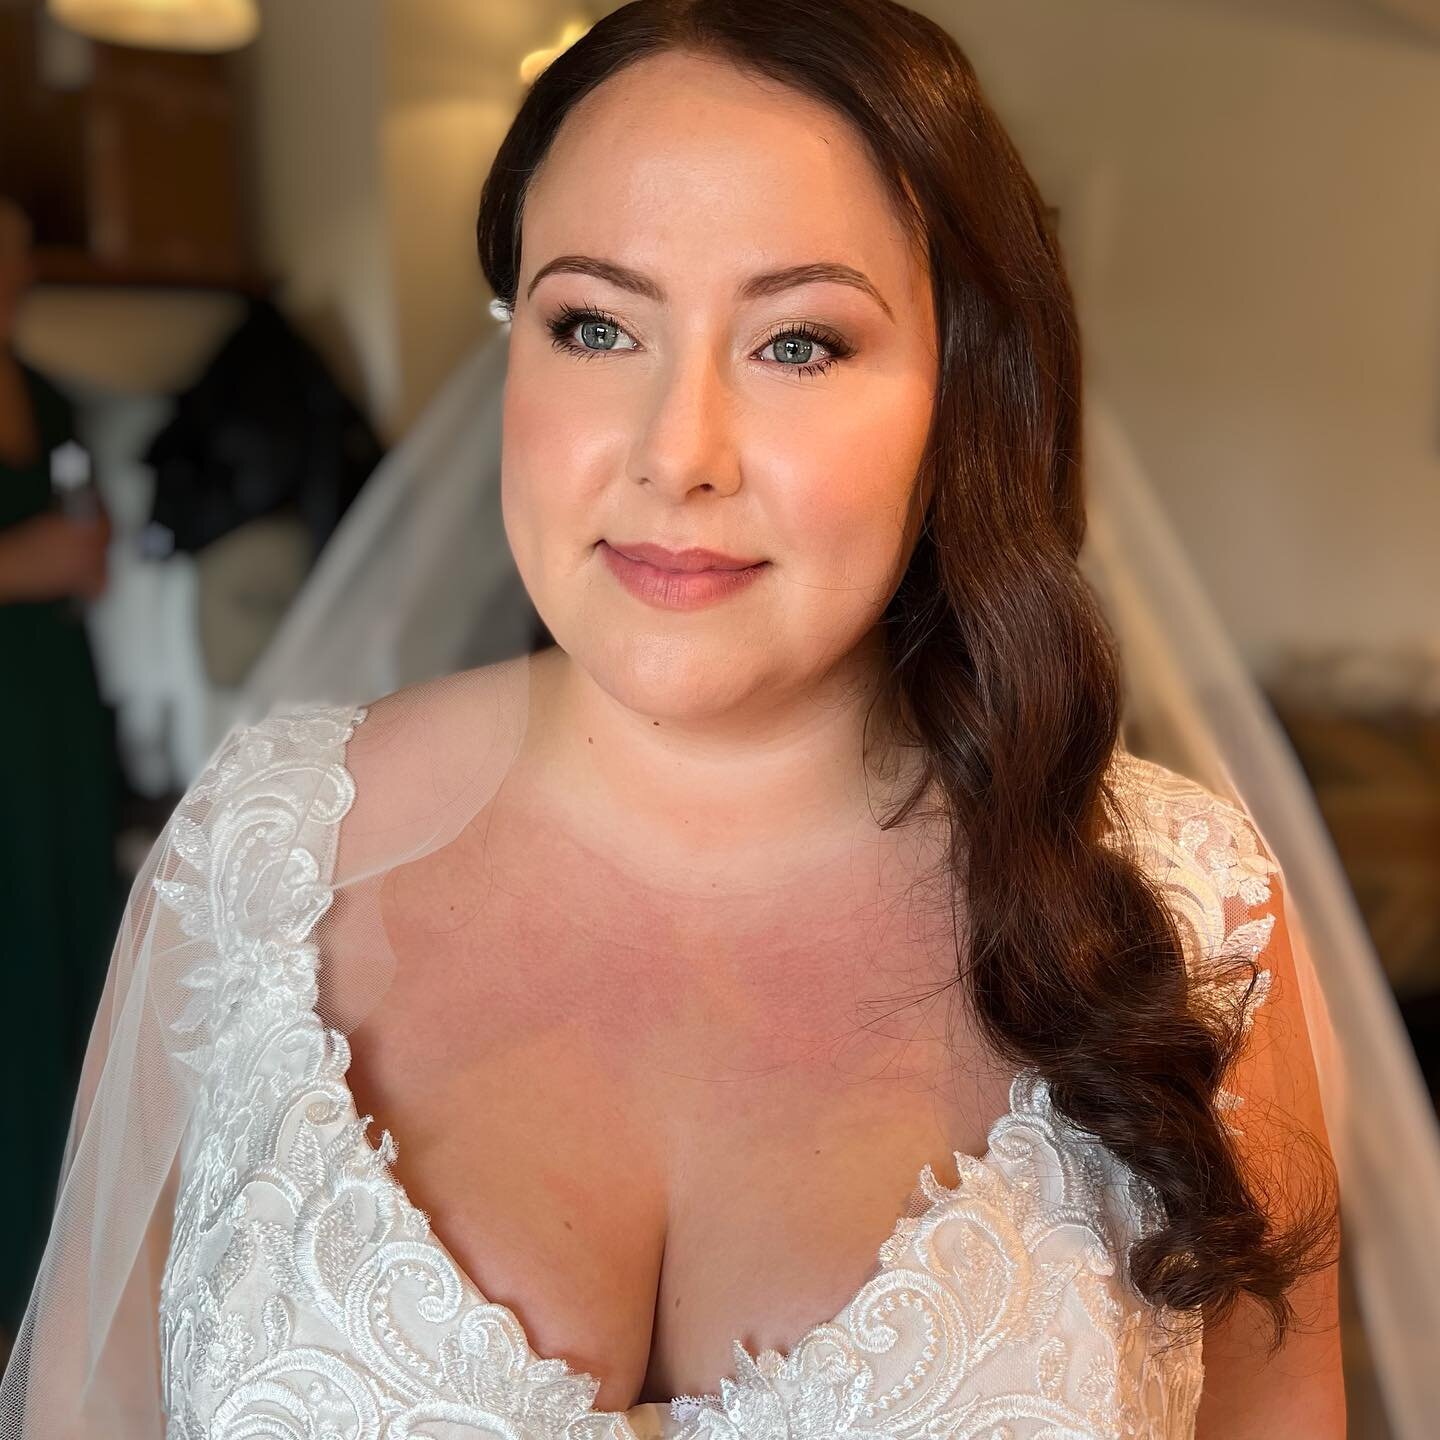 //JODIE//
@thewestmill another lovely morning spent with Jodie and her girls! 

#derbyshire #derbyshireweddings #westmill #mua #makeup #makeupartist #hairstylist #hairandmakeup #bride #wedding #weddingday #bridalmakeup #bridalmua #bridalhair #bridalh